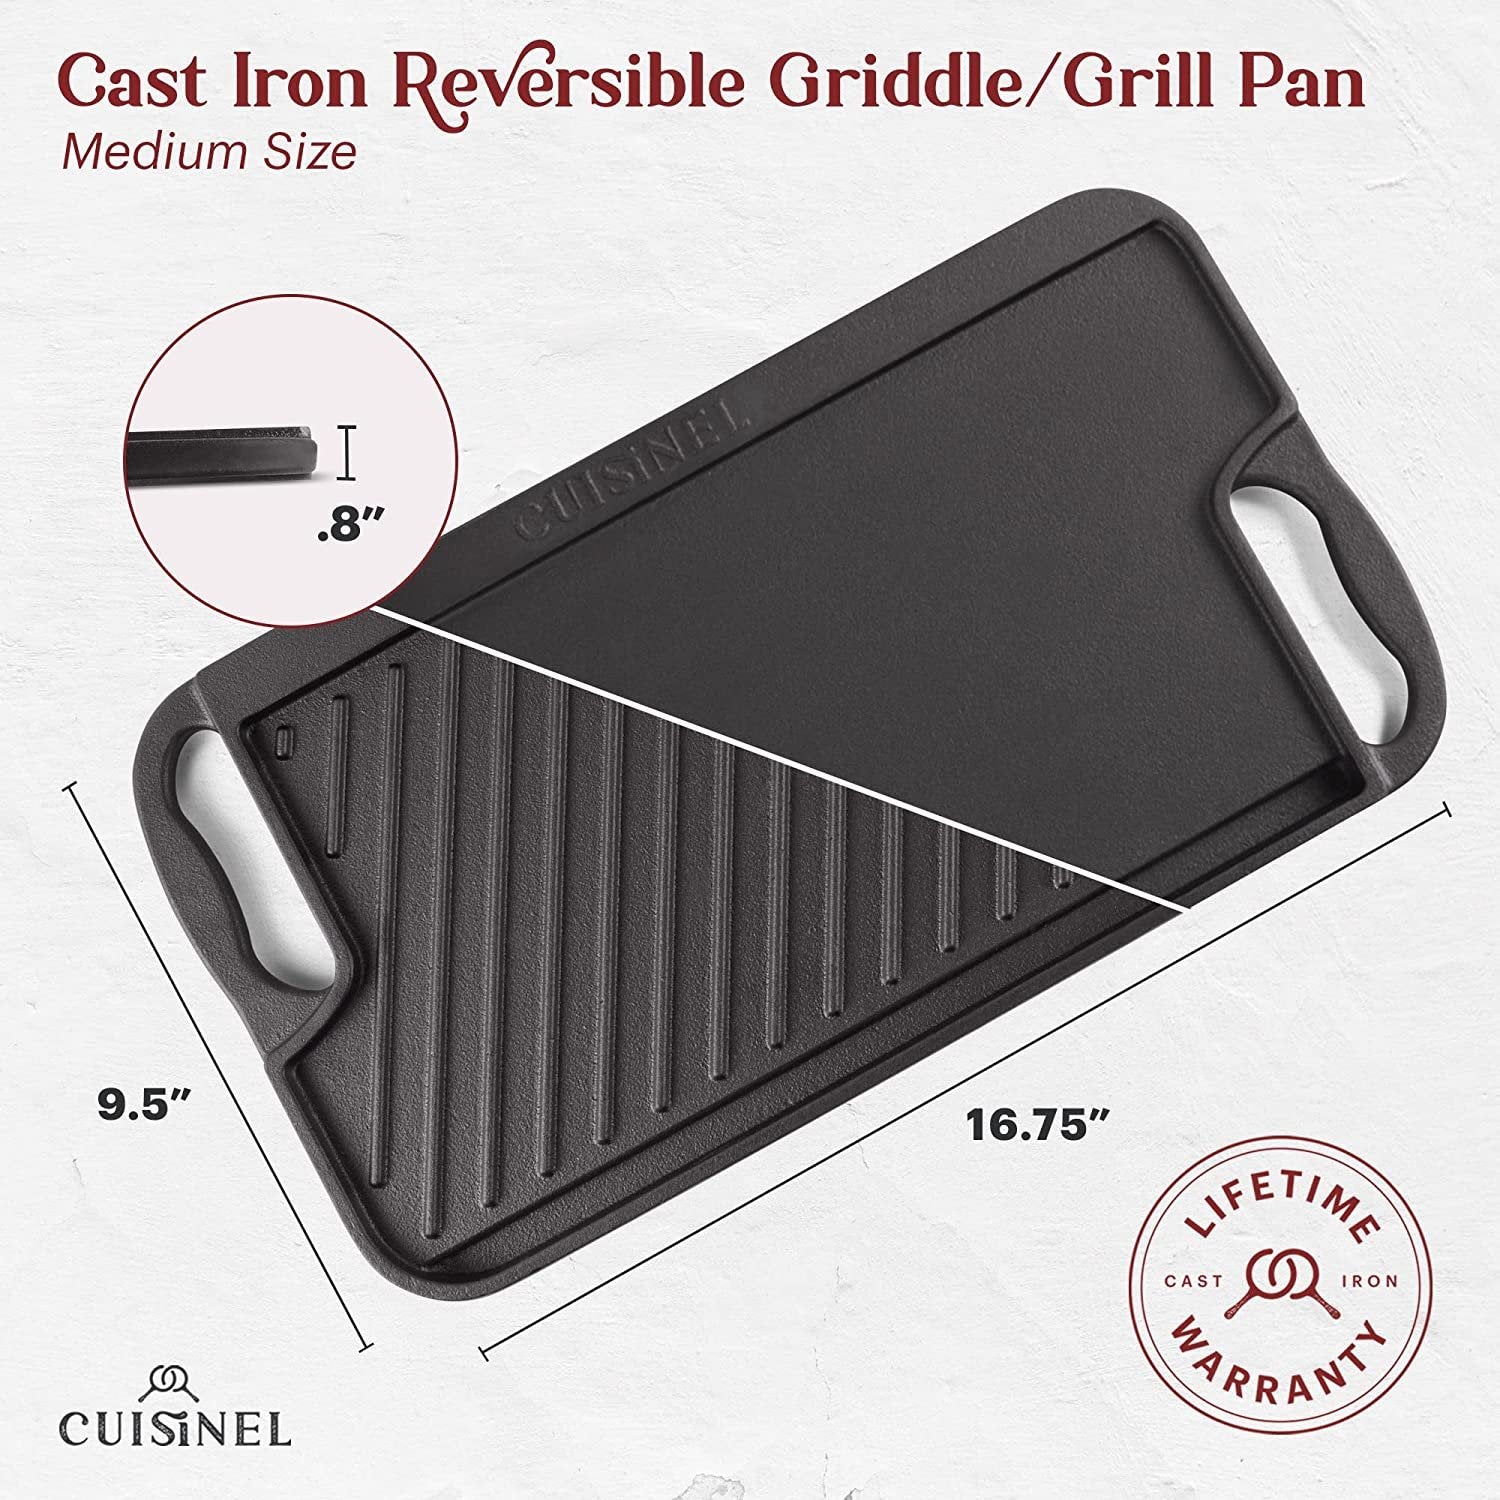 Cast Iron Griddle / Grill + Scraper / Cleaner - Reversible Pre-Seasoned 16.75" X 9.5"-inch Dual Handle Flat Skillet and Griller Pan + Cleaning Accessories - Indoor/Outdoor Stove Top Burner, Gas Safe